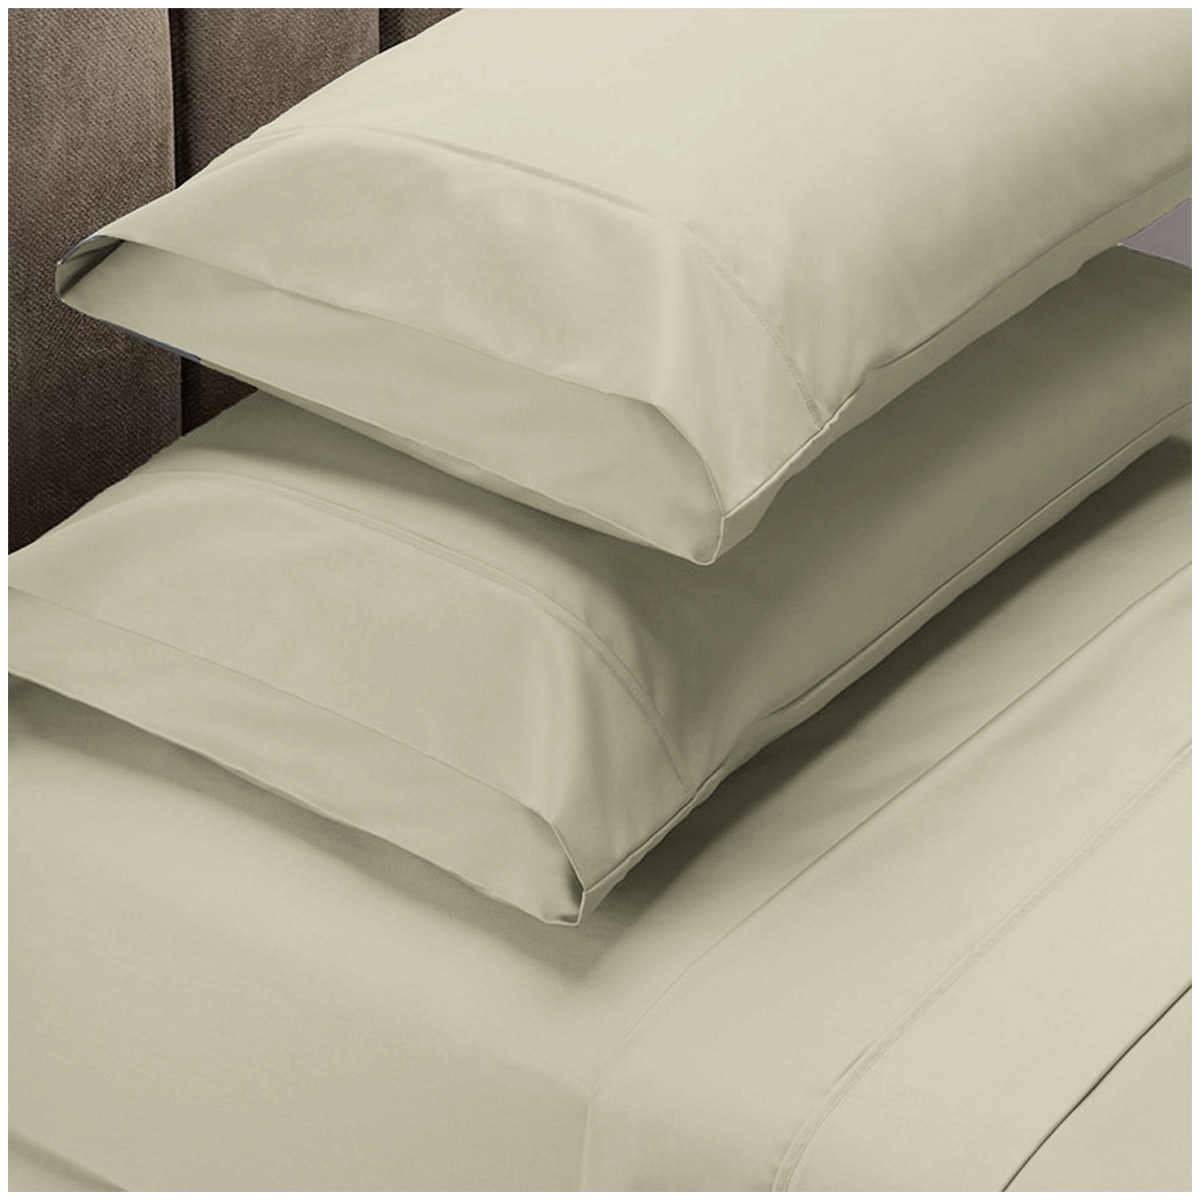 Bdirect Renee Taylor 1500 Thread Count Cotton Blend Sheet Set - Queen - Ivory